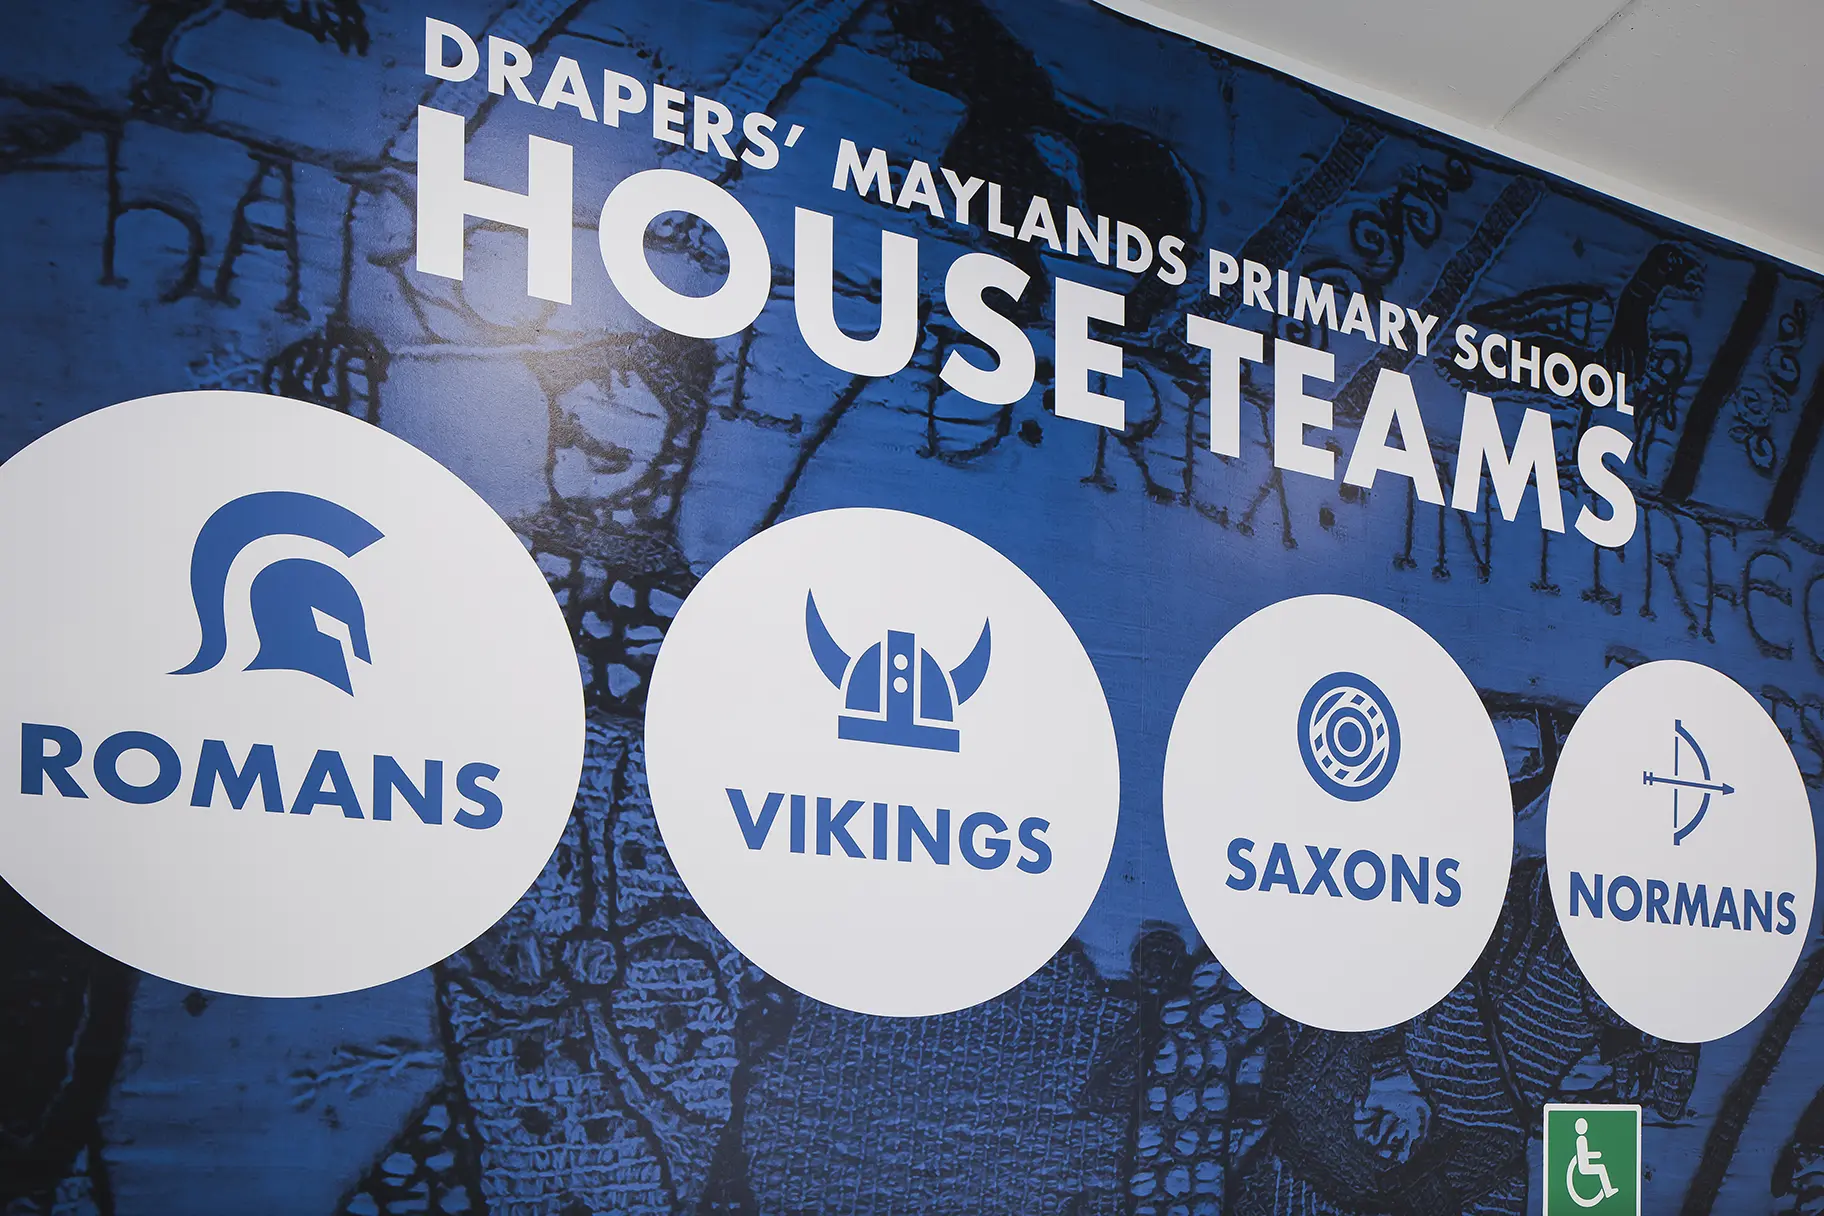 Drapers Marylands history timeline